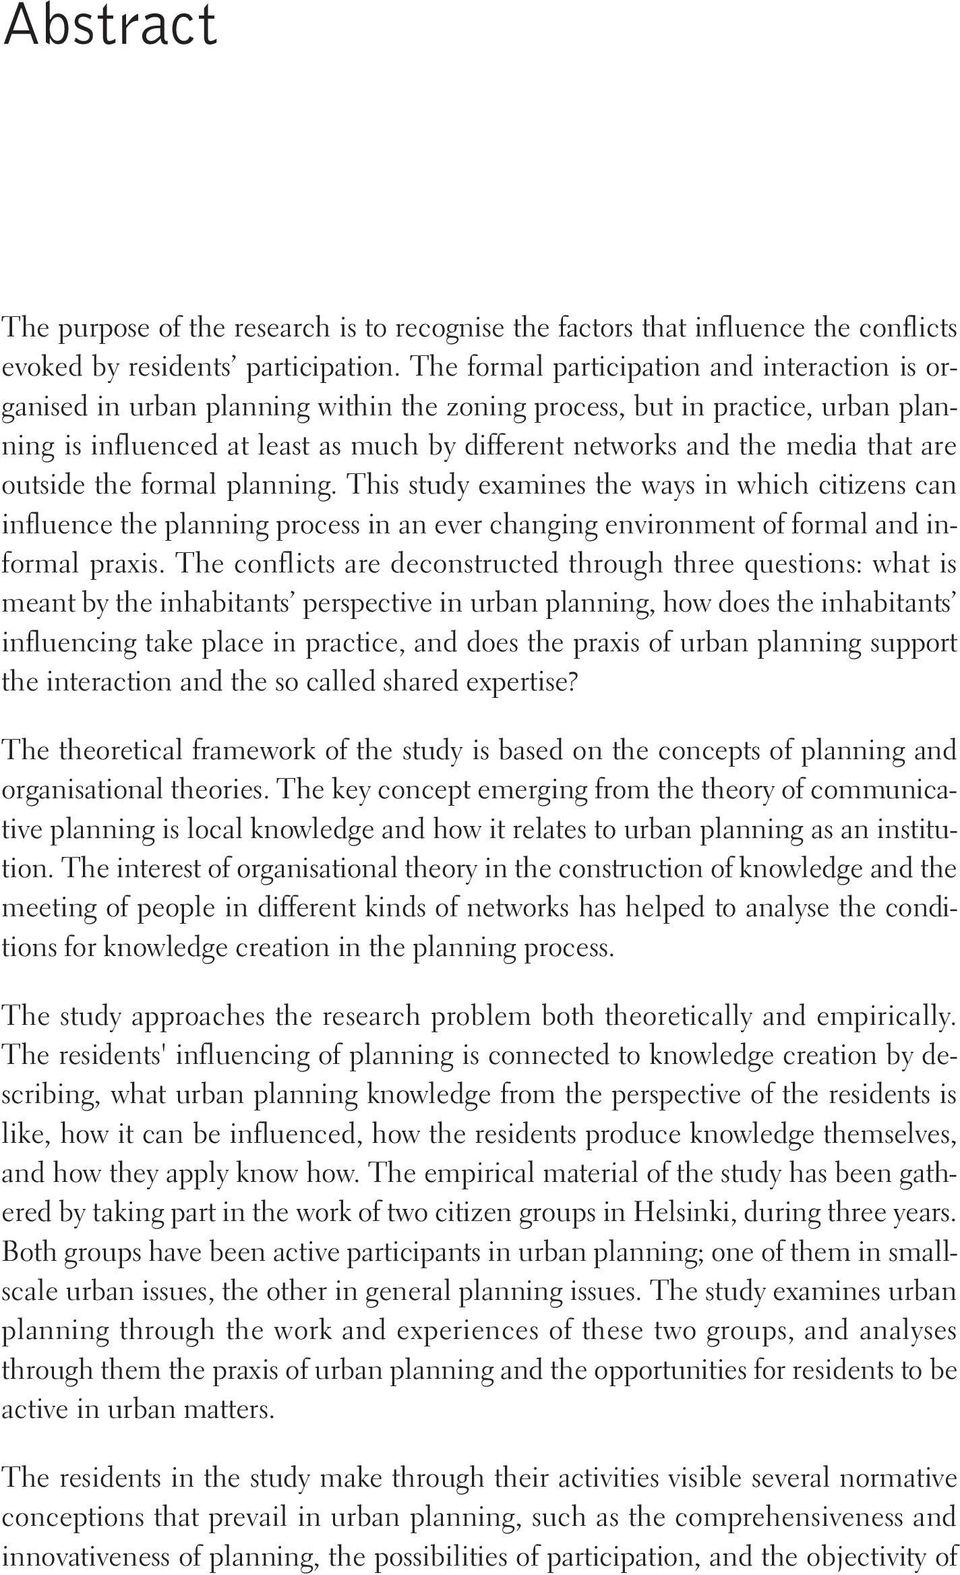 that are outside the formal planning. This study examines the ways in which citizens can influence the planning process in an ever changing environment of formal and informal praxis.